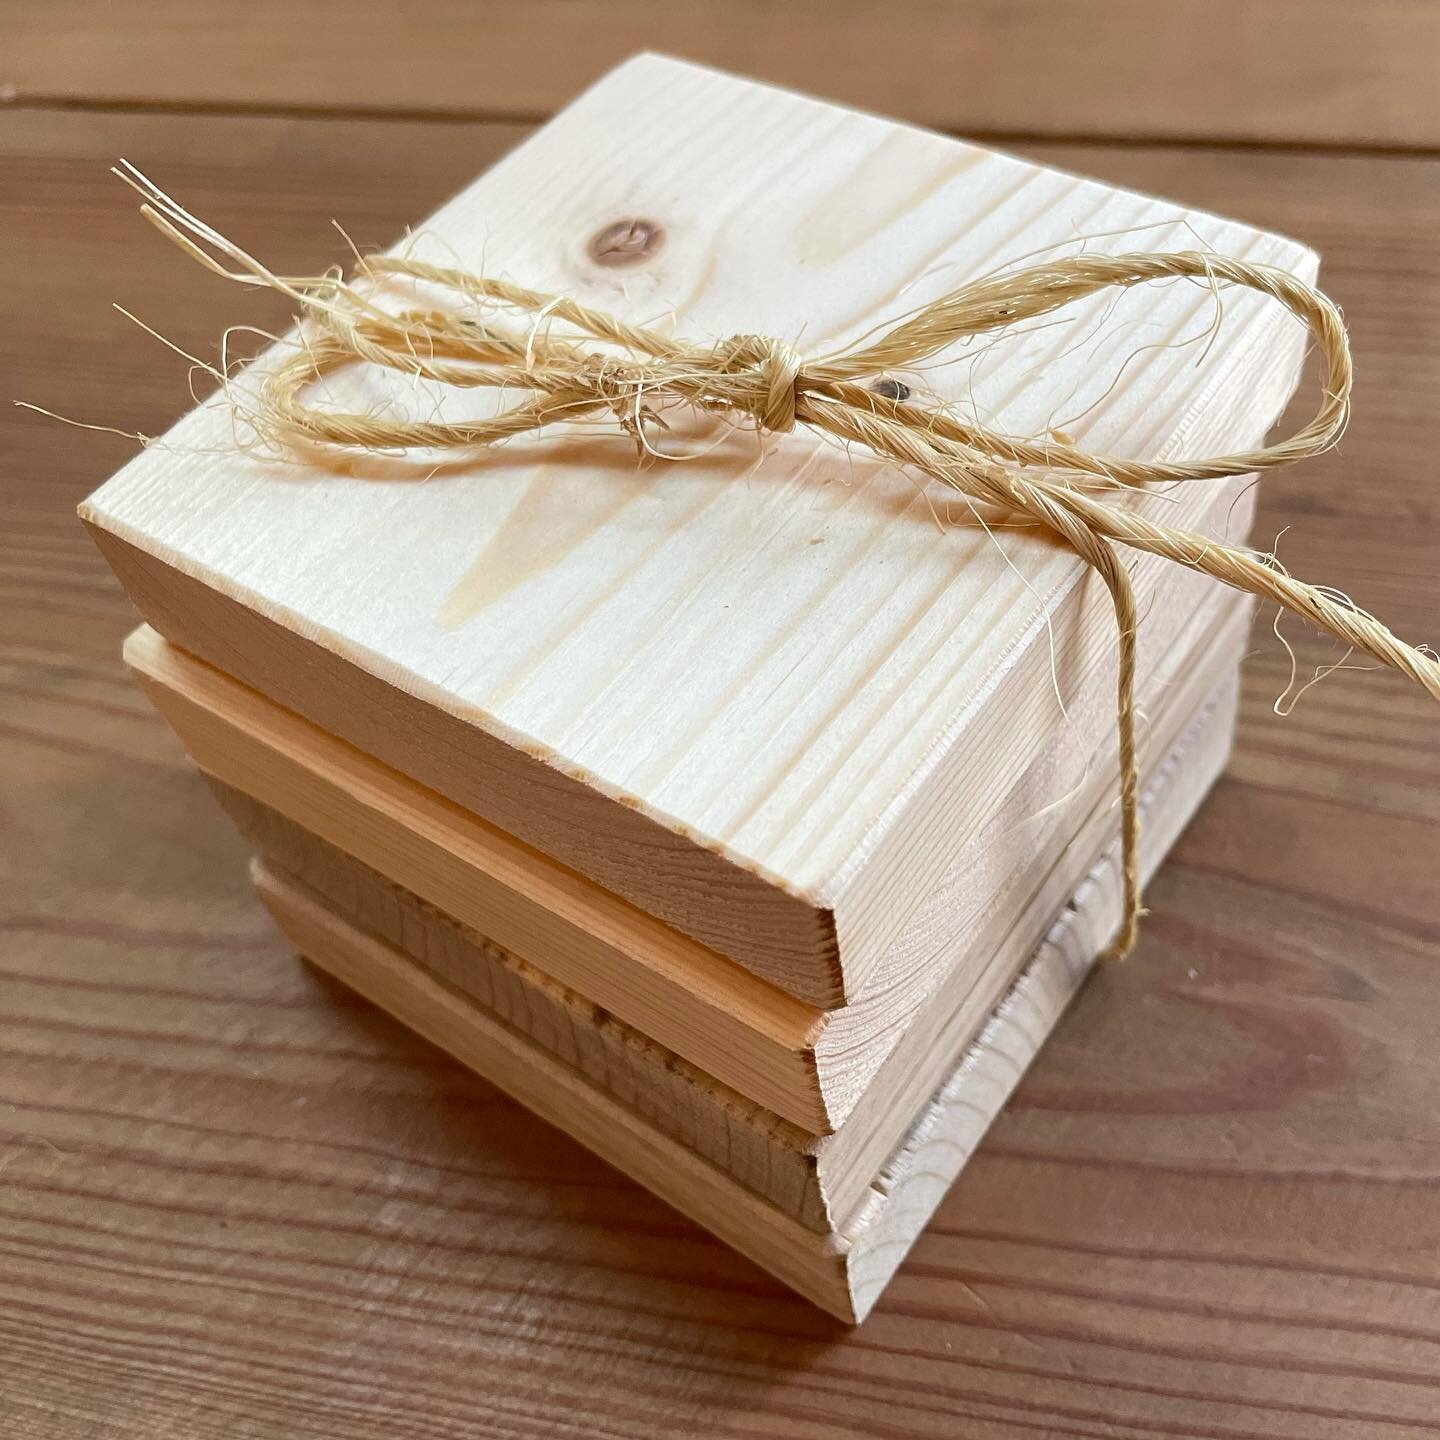 NEW PRODUCT LAUNCH SALE✨

These beautiful rustic wood slice blanks have been added to our website! These work great as a blank canvas or would be beautiful simply as they are. Use promo code NEWPRODUCT TO GET 15% off of your order! 

#rusticwoodsuppl